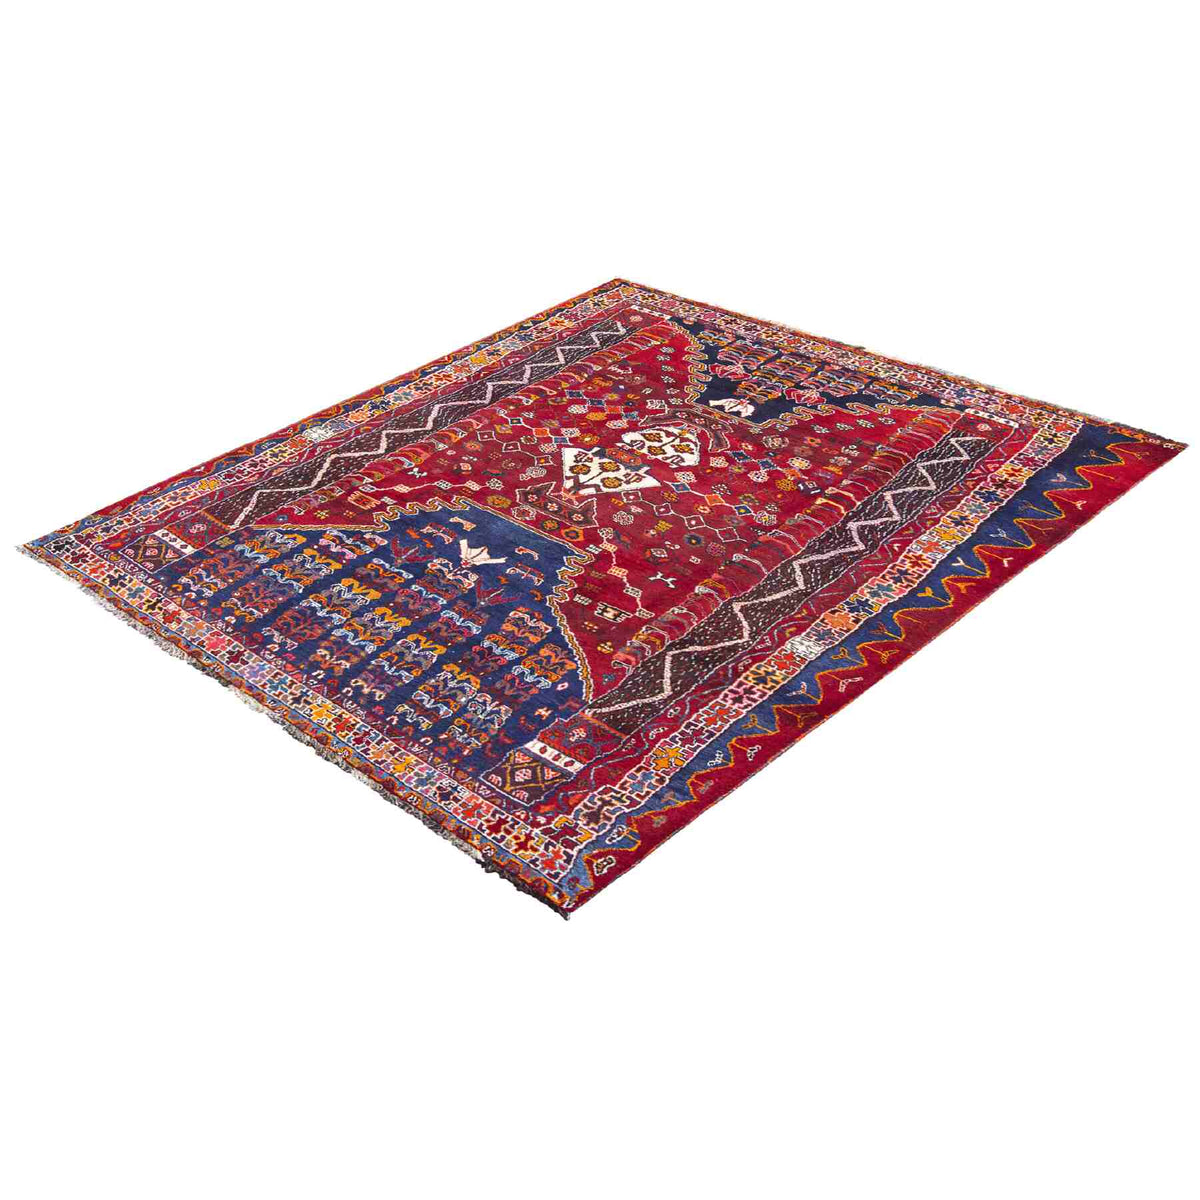 Hand-knotted Wool Shiraz Vintage Persian Rug 185cm x 290cm